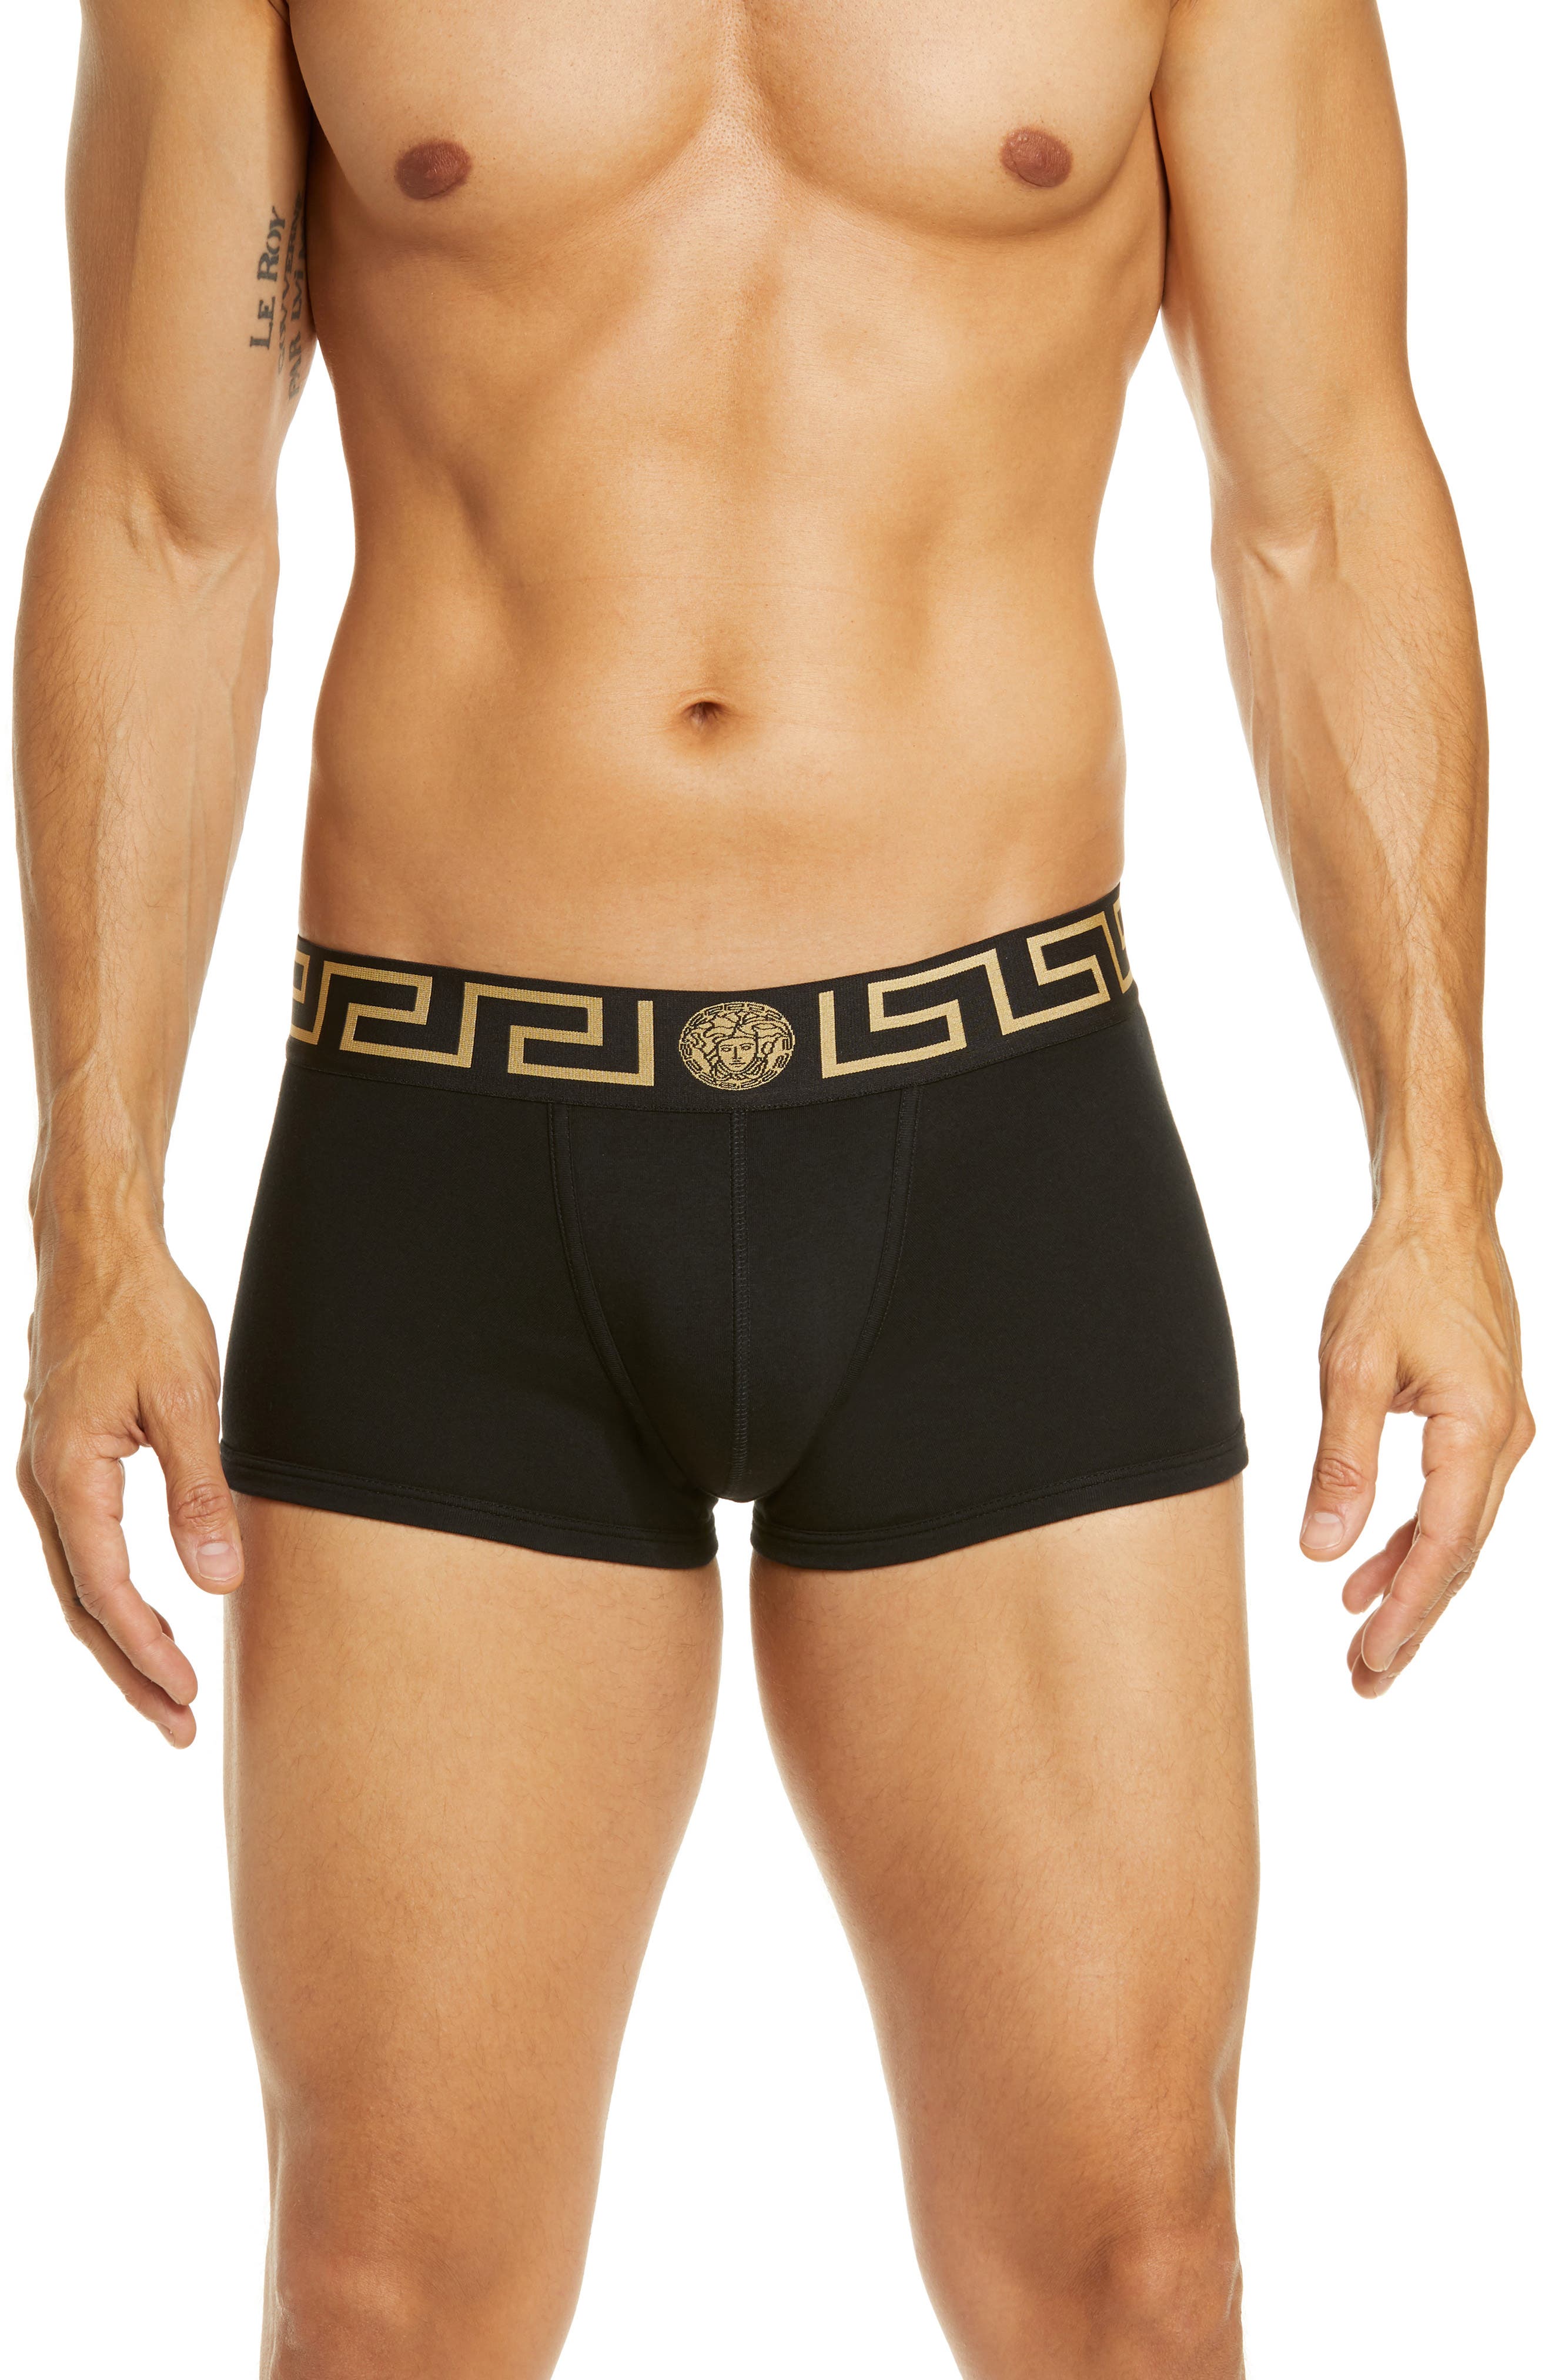 Versace First Line Low Rise Trunks in Black/Gold at Nordstrom, Size 5 Us